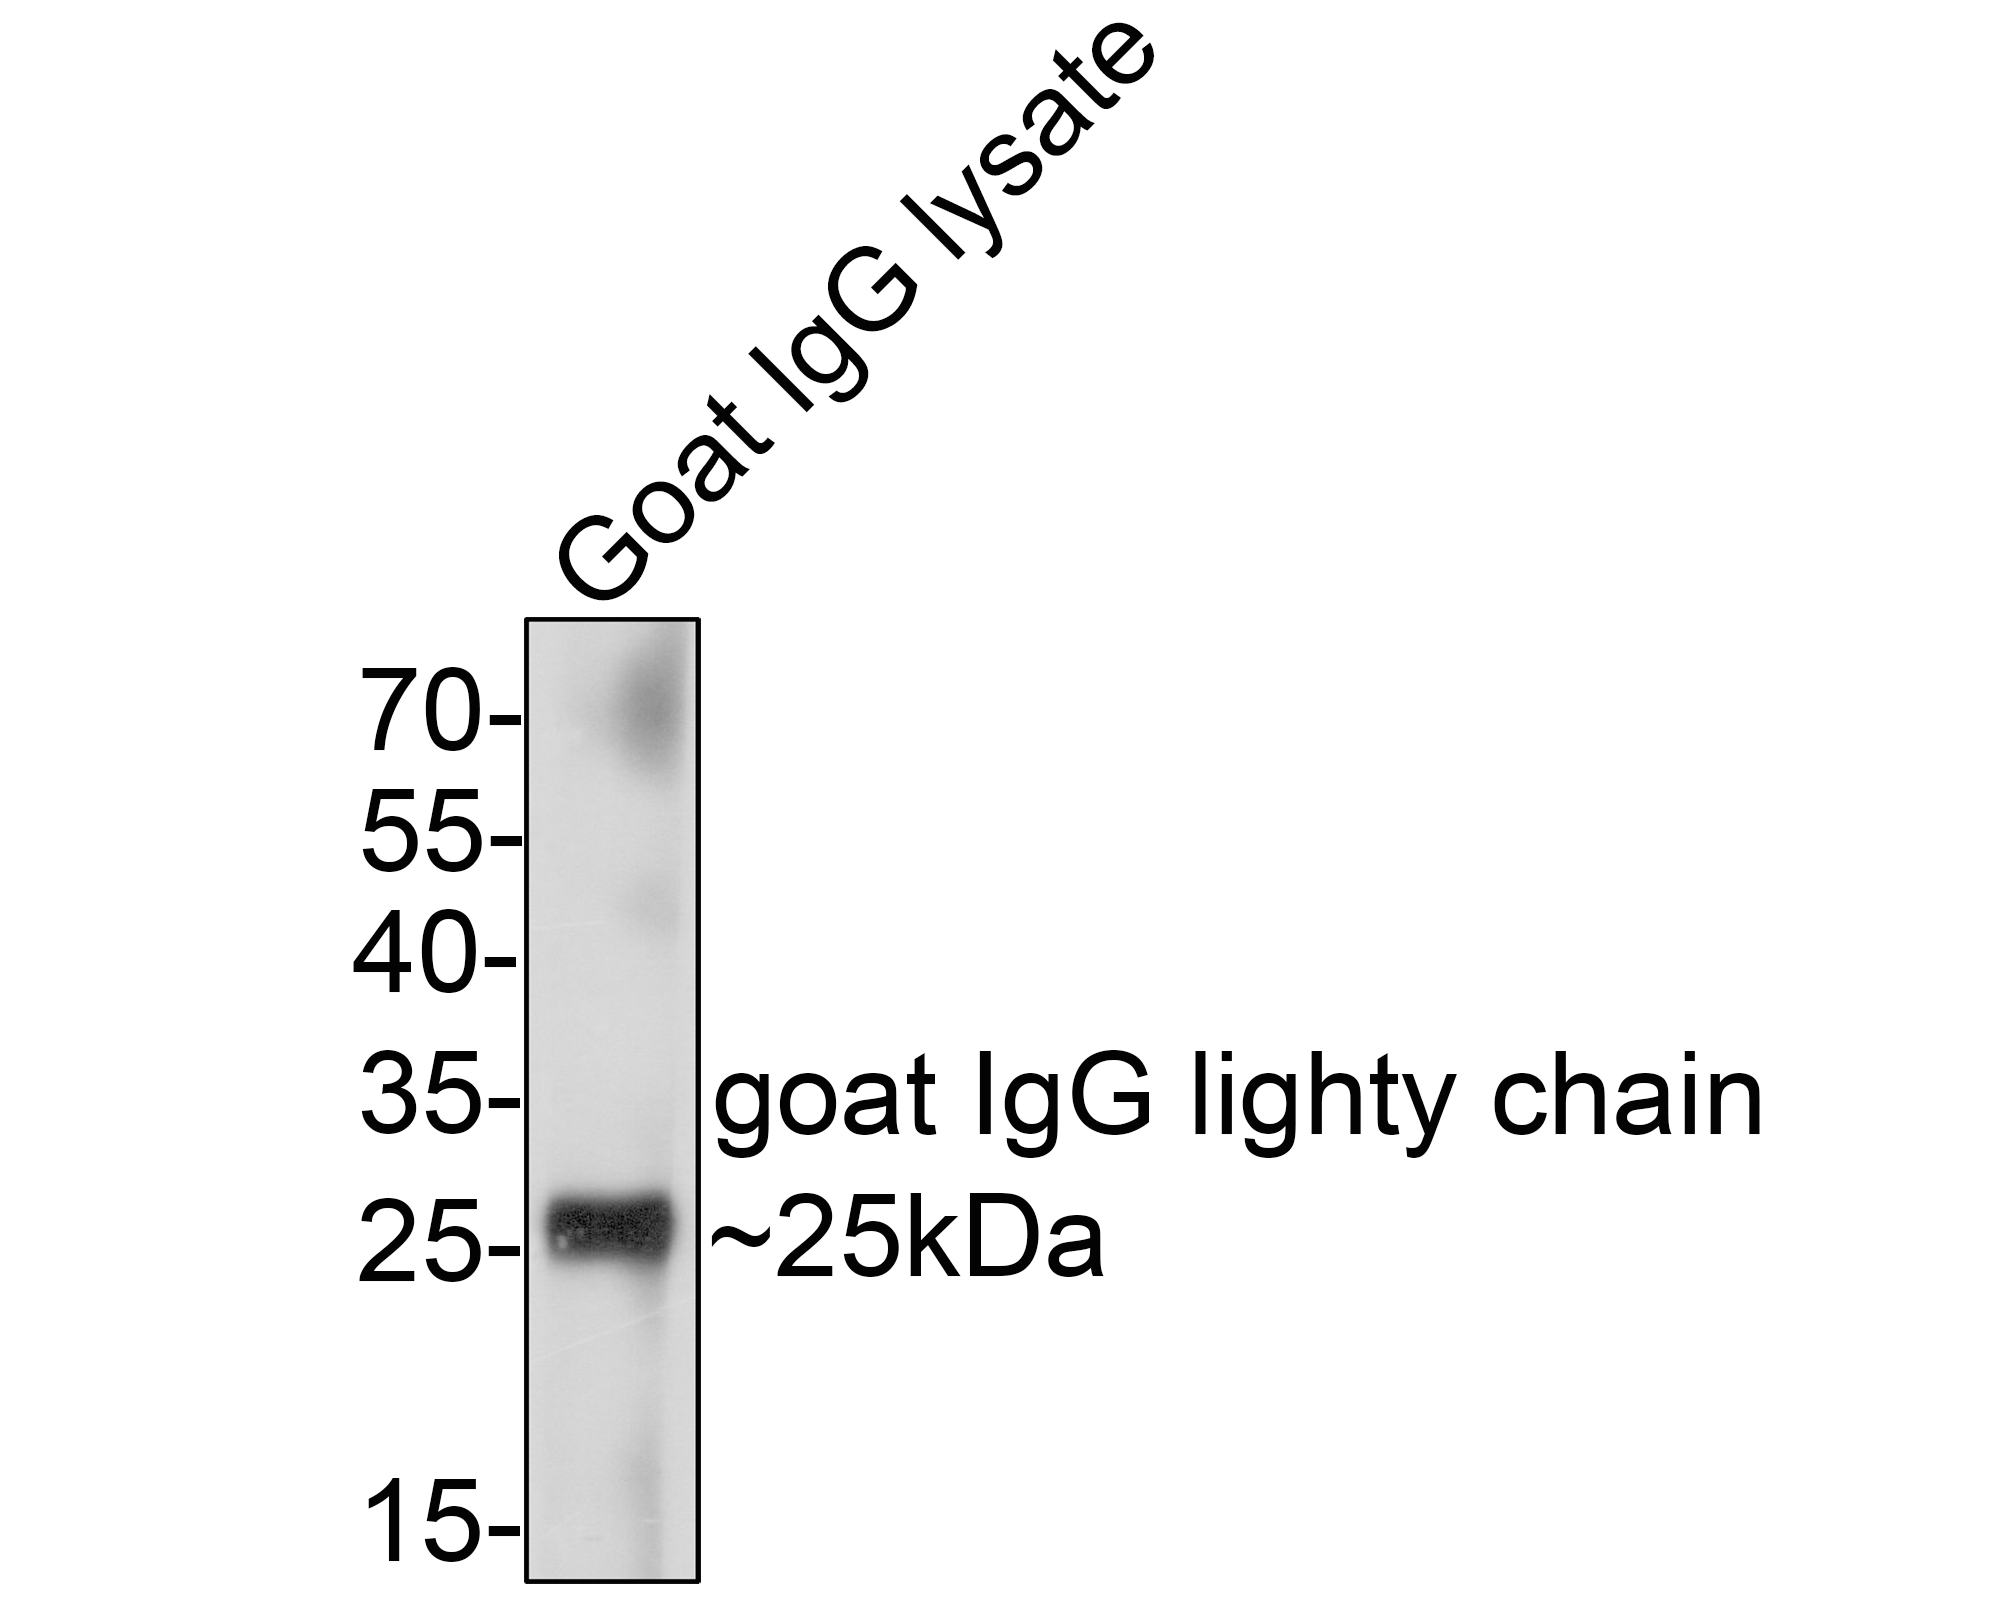 Western blot analysis of Mouse anti goat IgG lighty chain on Goat IgG lysate with Mouse anti-Mouse anti goat IgG lighty chain antibody (M1007-14) at 1/5,000 dilution.<br />
<br />
Predicted band size: 25 kDa<br />
Observed band size: 25 kDa<br />
<br />
Exposure time: 2 minutes;<br />
<br />
12% SDS-PAGE gel.<br />
<br />
Proteins were transferred to a PVDF membrane and blocked with 5% NFDM/TBST for 1 hour at room temperature. The primary antibody (M1007-14) at 1/5,000 dilution was used in 5% NFDM/TBST at room temperature for 2 hours.